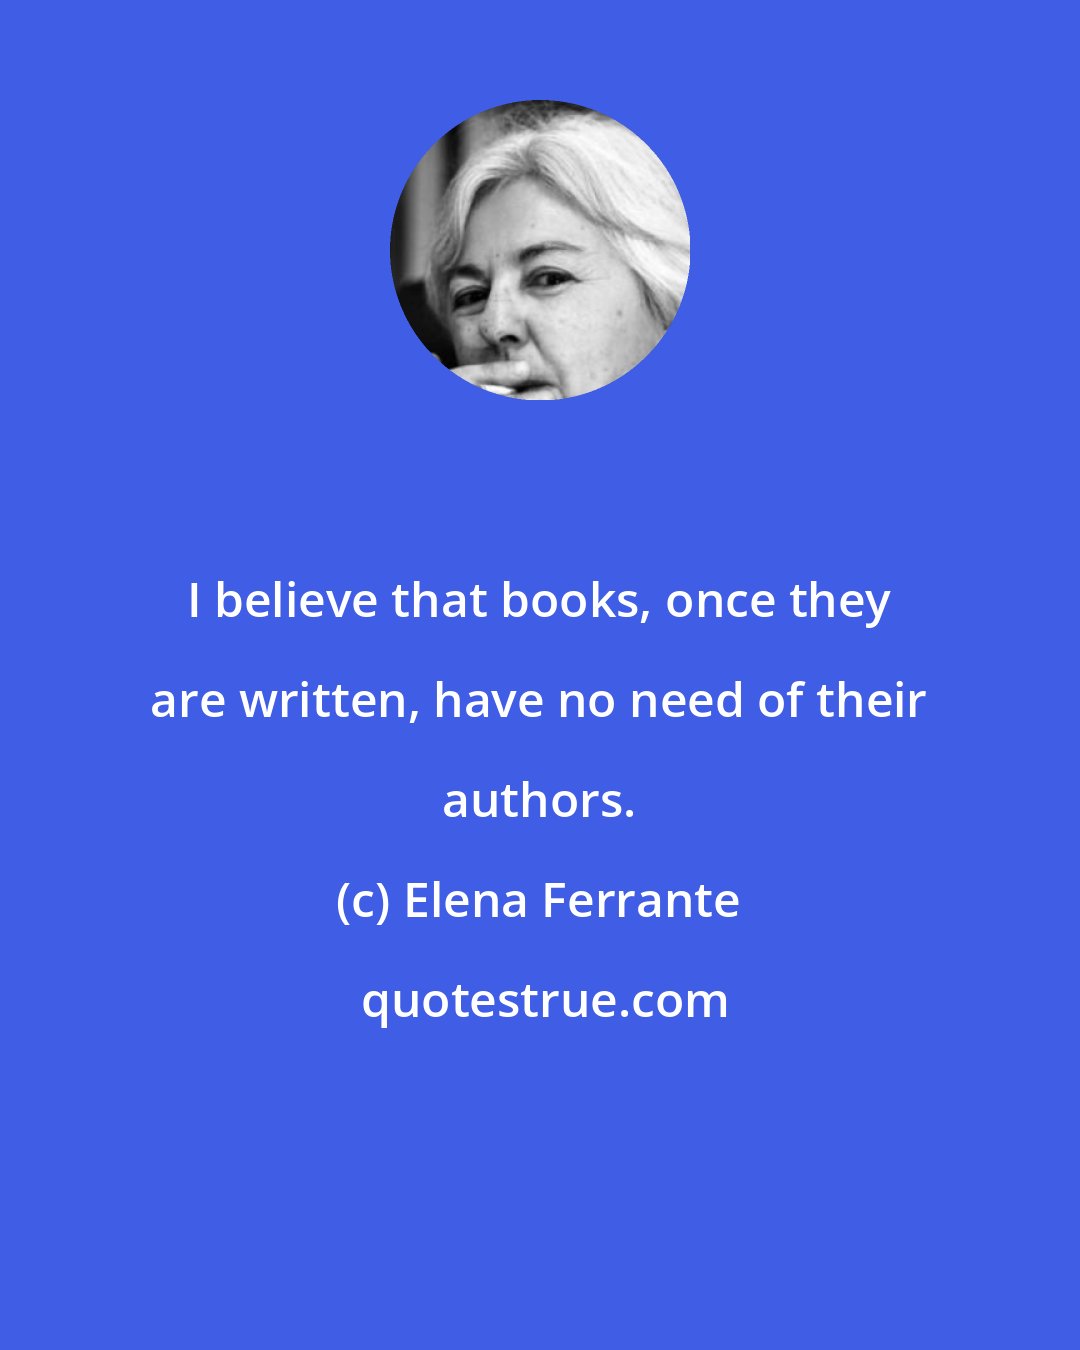 Elena Ferrante: I believe that books, once they are written, have no need of their authors.